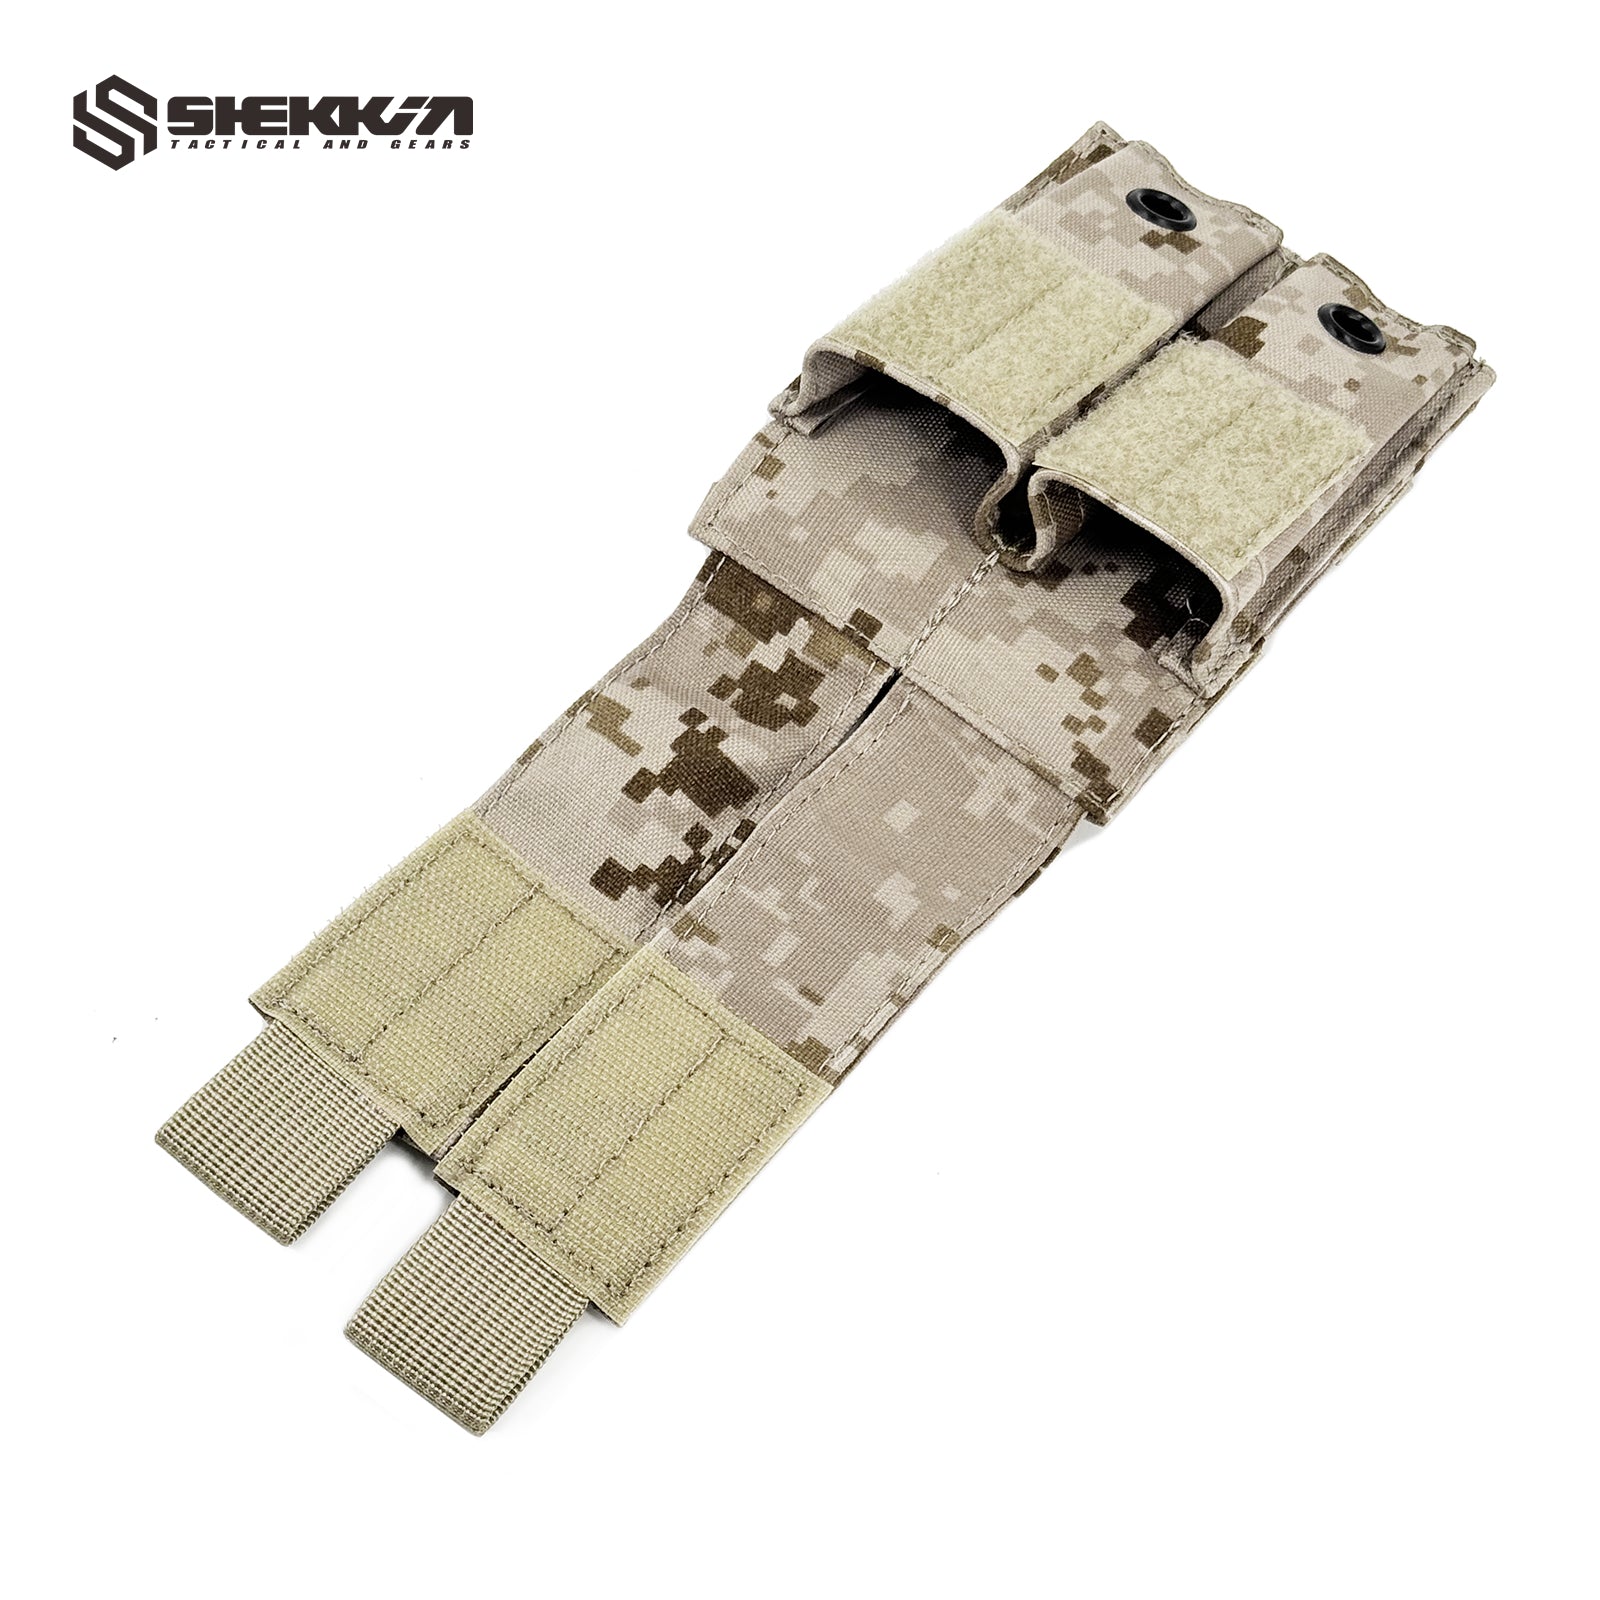 EI style AOR1 double 9mm Mag pouch